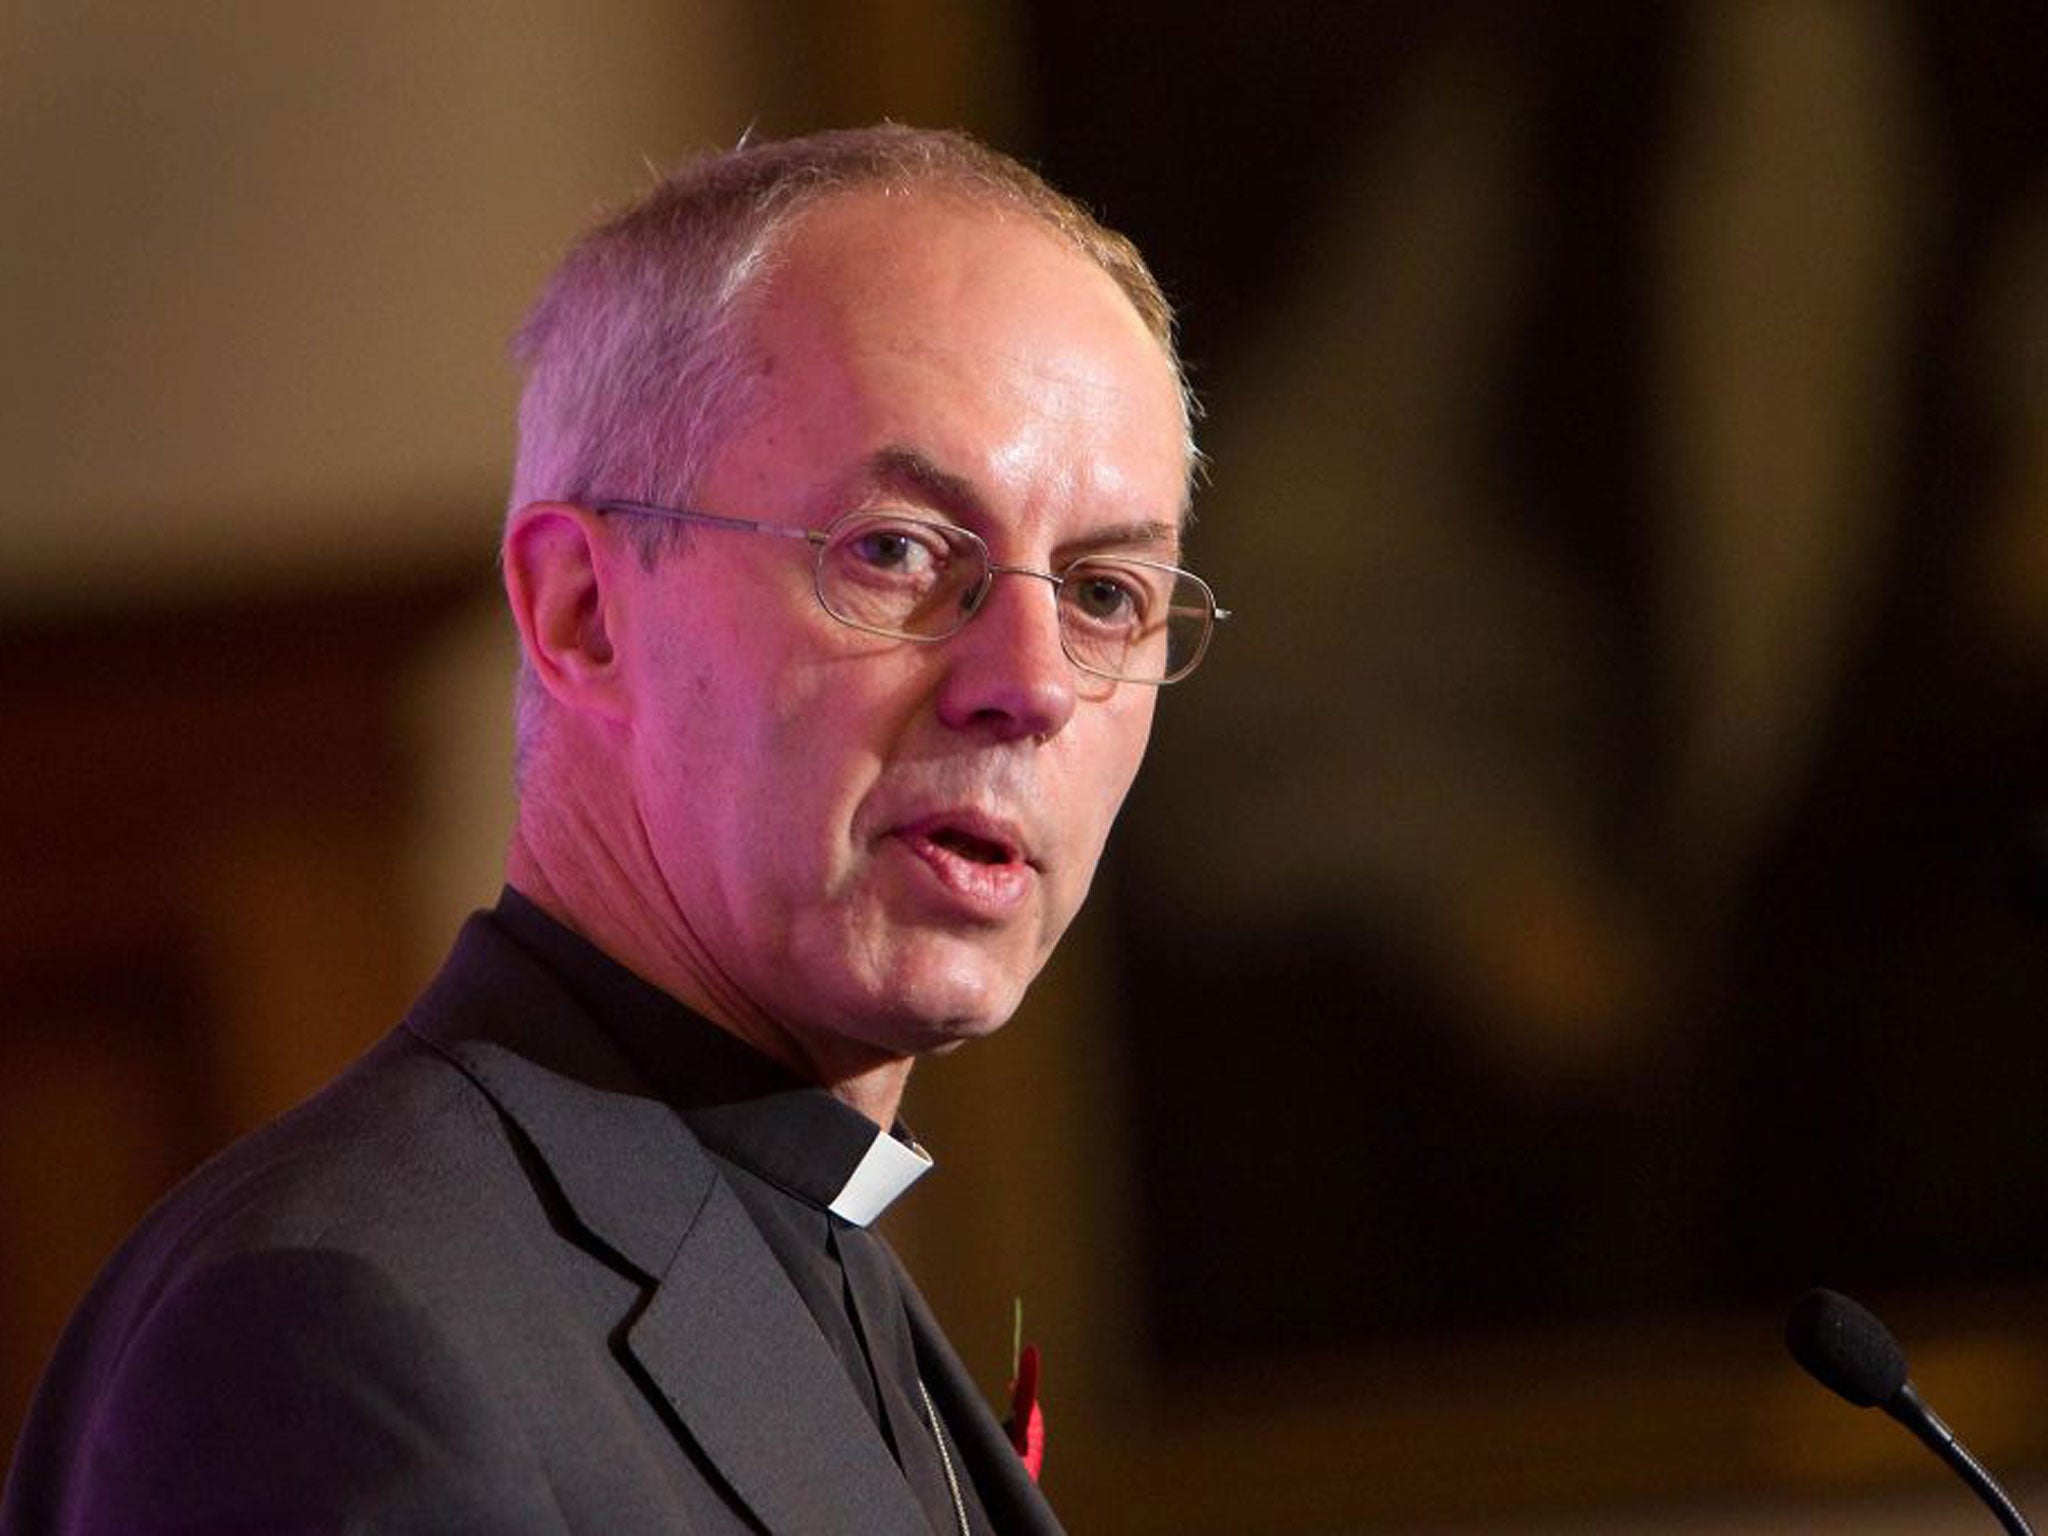 The Archbishop of Canterbury: church apologises for failures over child sex abuse complaints